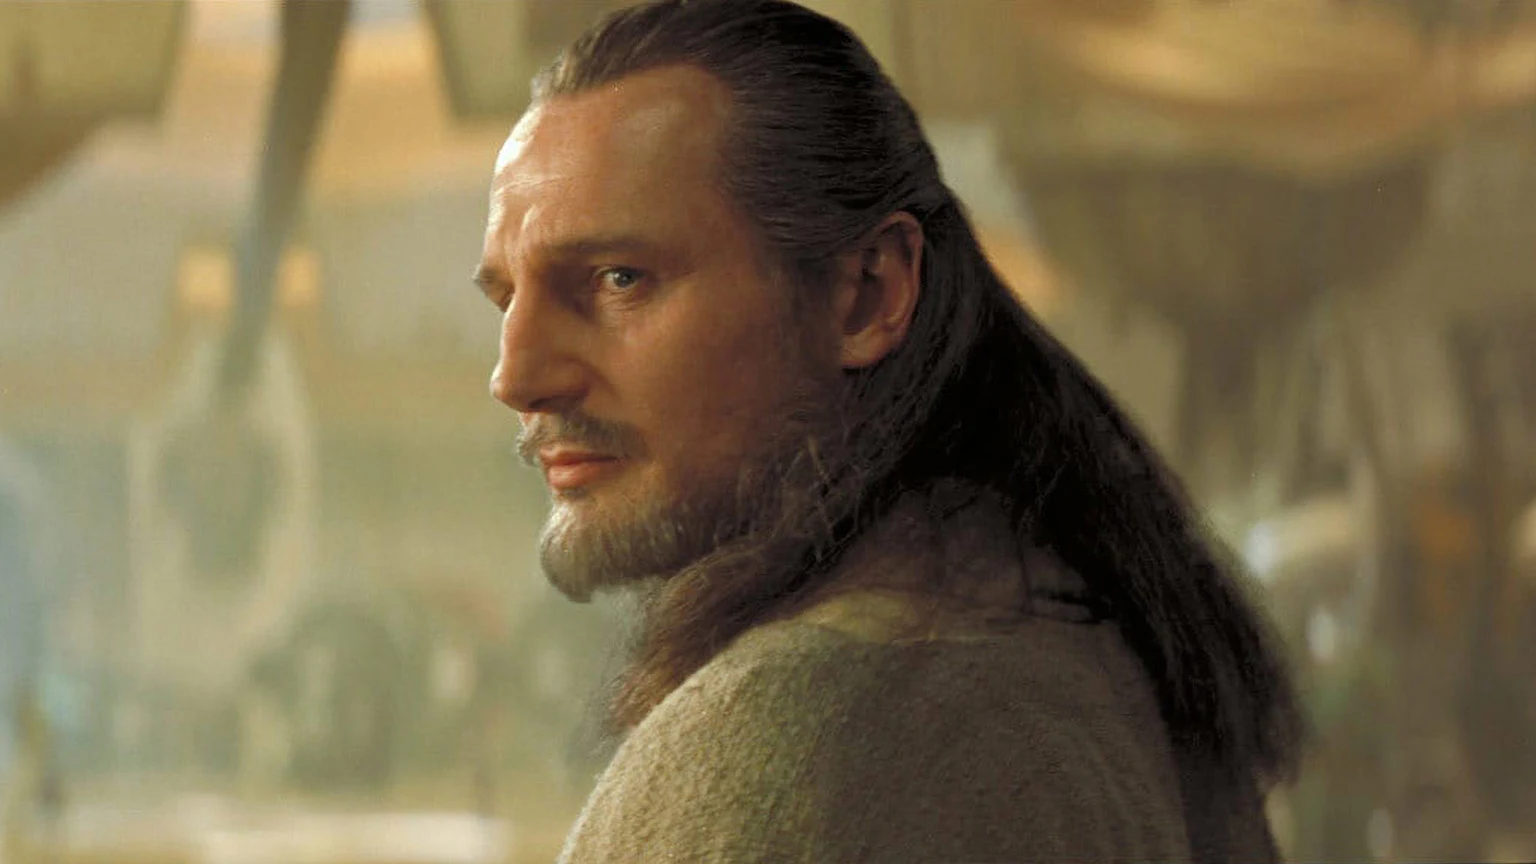 Liam Neeson To Reprise Role As Qui-Gon Jinn In New ‘Star Wars’ Prequel Series ‘Tales Of The Jedi’